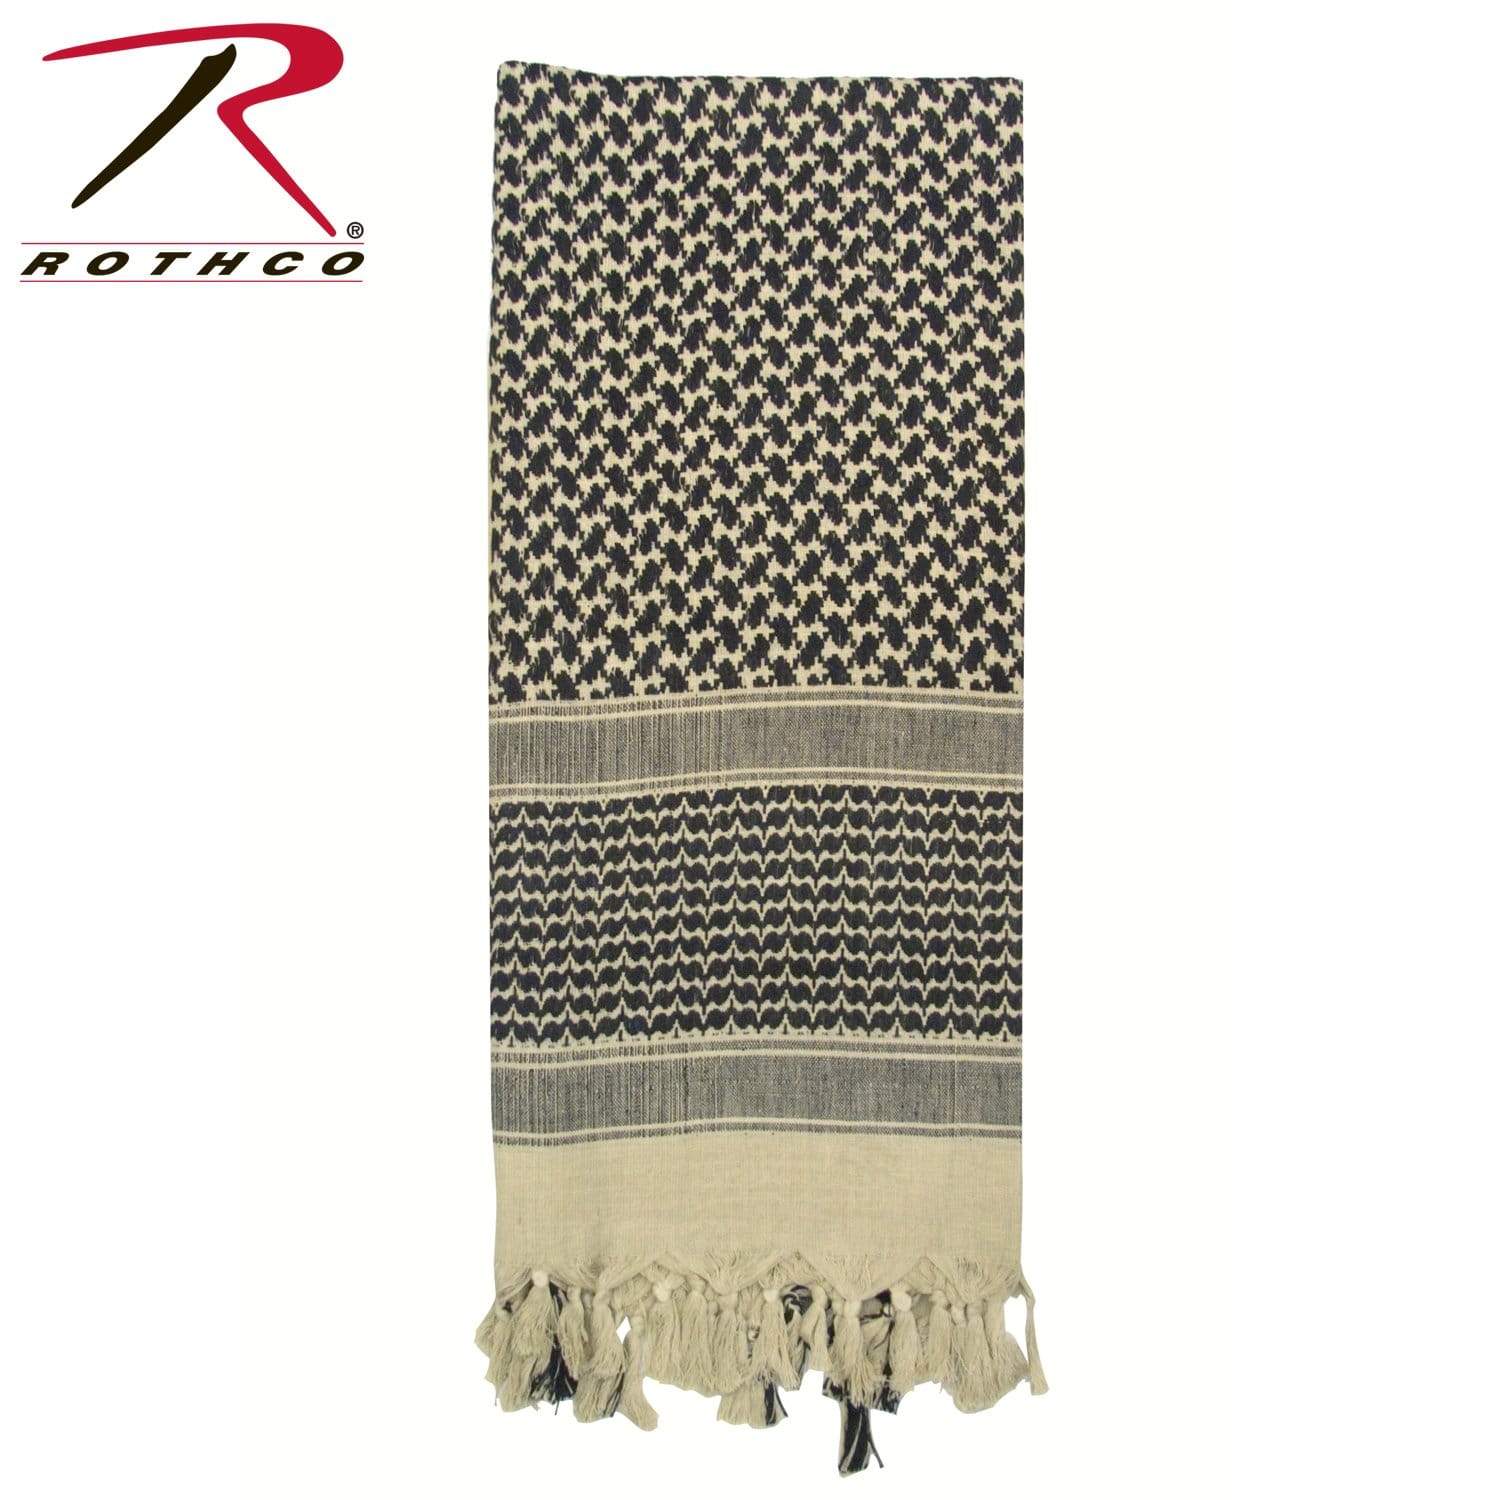 Rothco Shemagh Tactical Desert Keffiyeh Scarf - Tan - Eminent Paintball And Airsoft